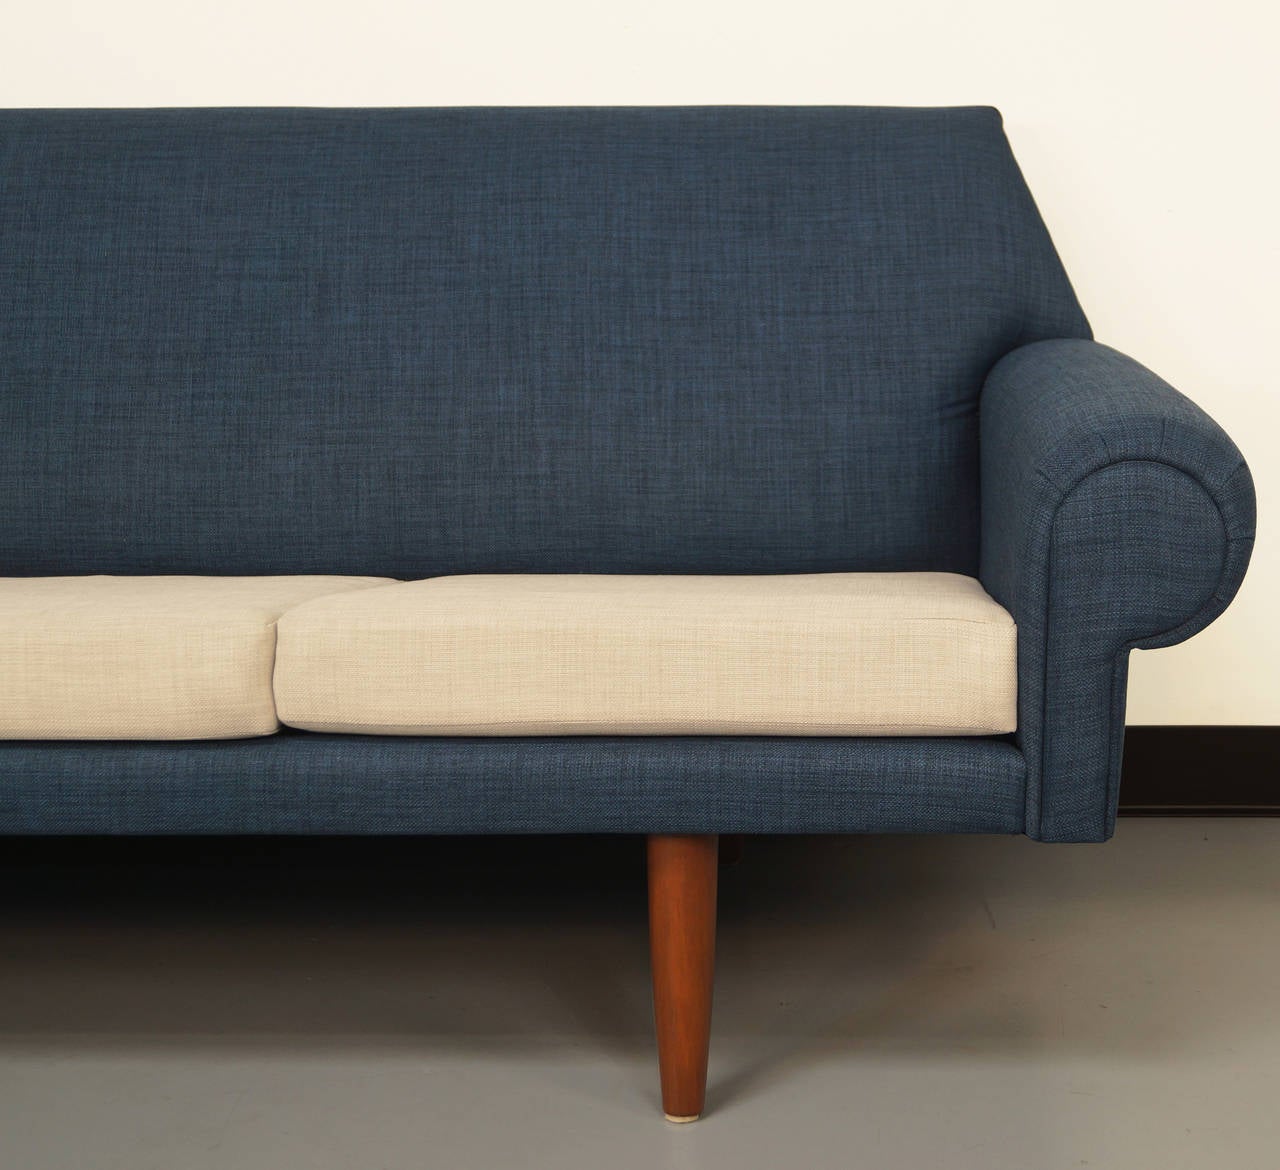 A elegant Danish sofa designed by Hans Wegner. Recently reupholstered in a two-tone linen fabric. Cushions contain original coil springs for superior comfort.